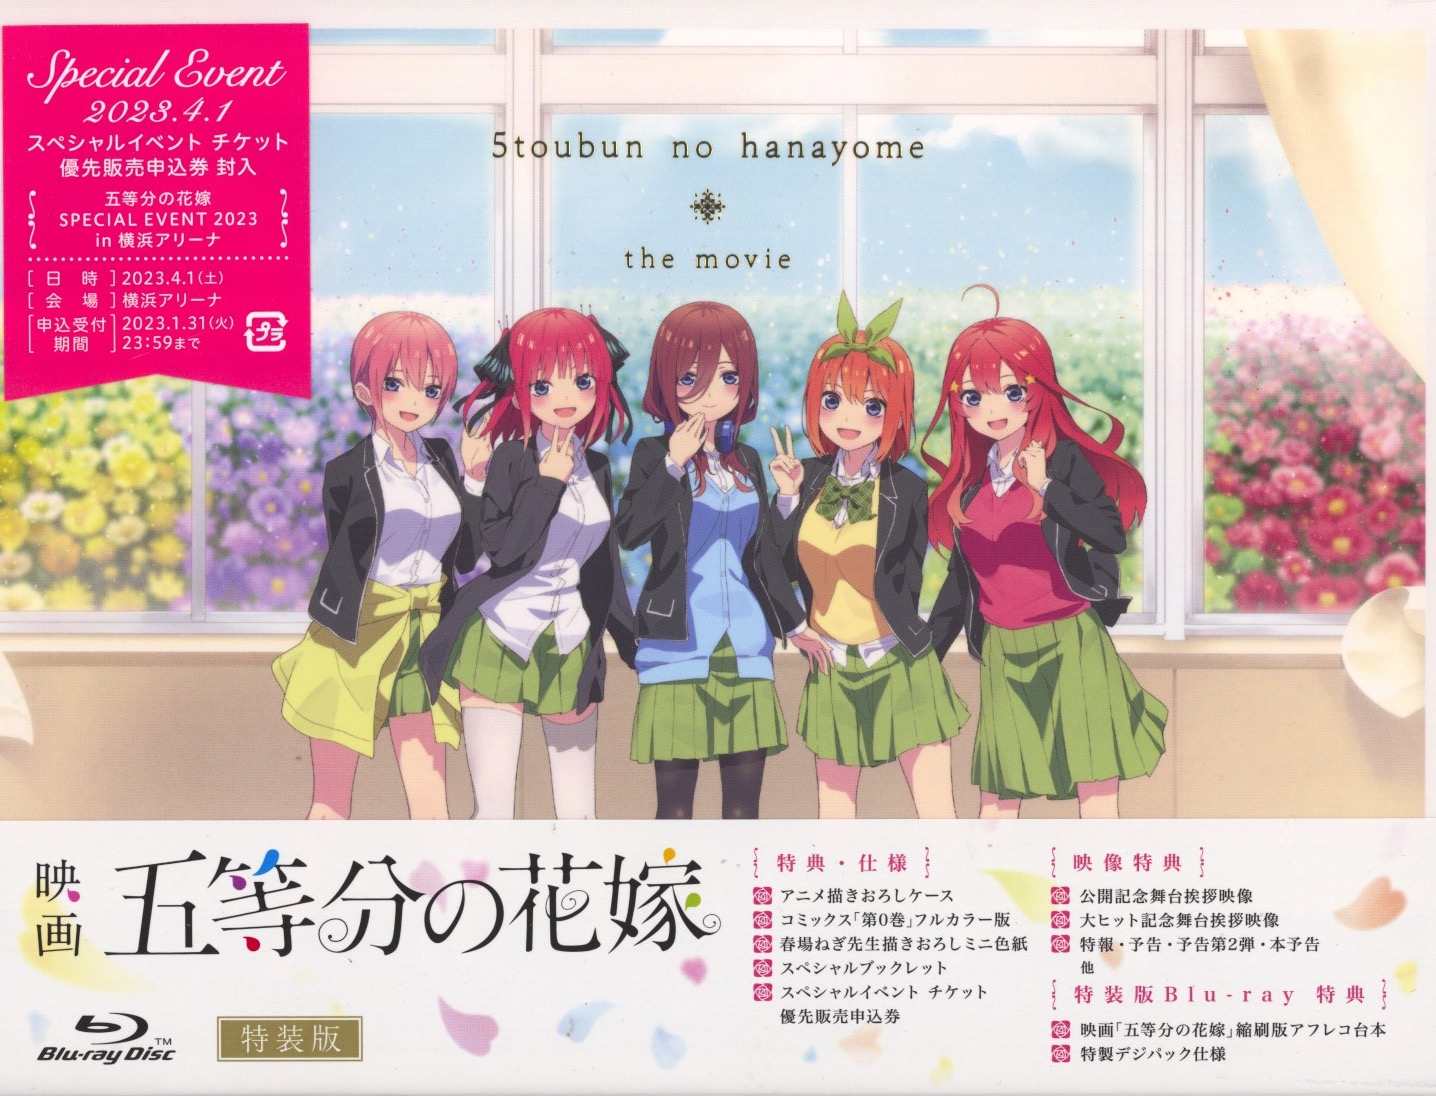 The Quintessential Quintuplets: Five Promises Made with Her